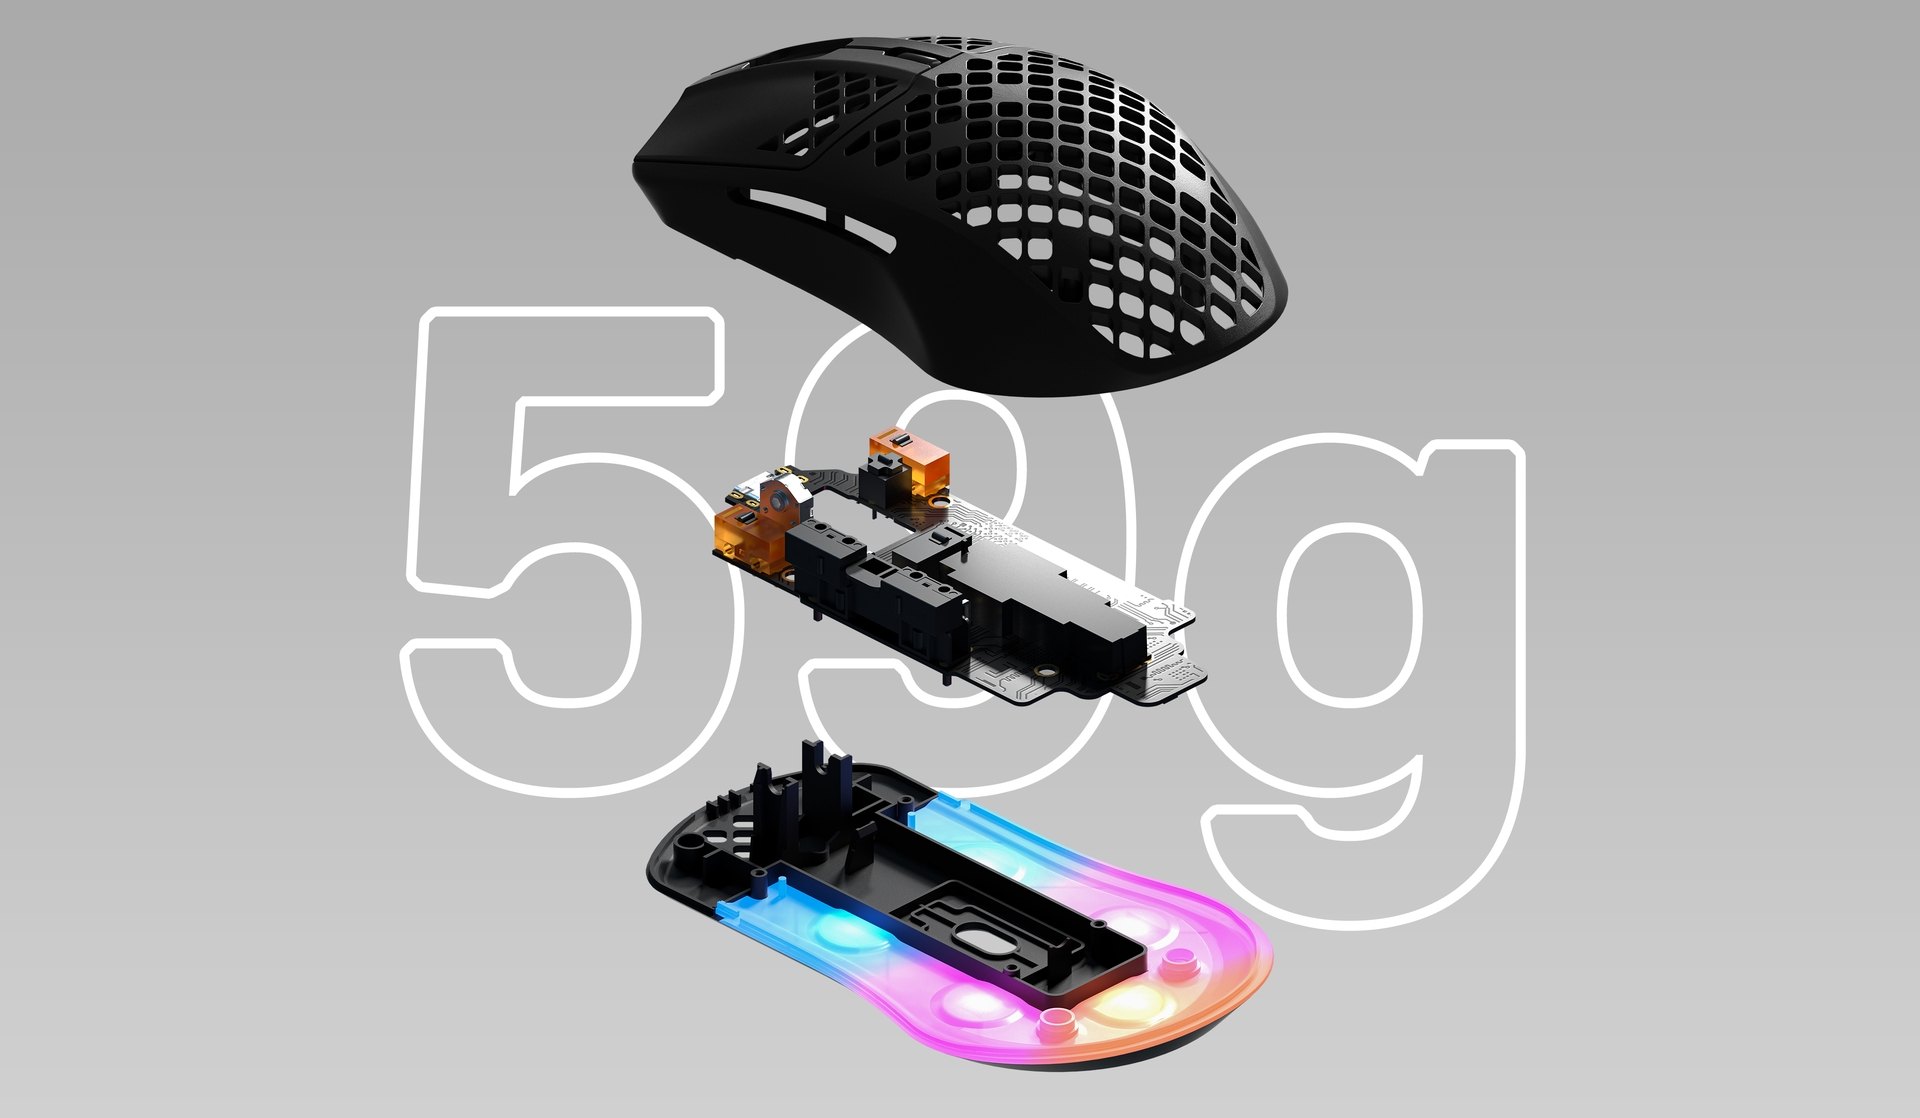 Aerox 3 2022 mouse, with all the parts shown vertically. Text behind image reads "59 g".